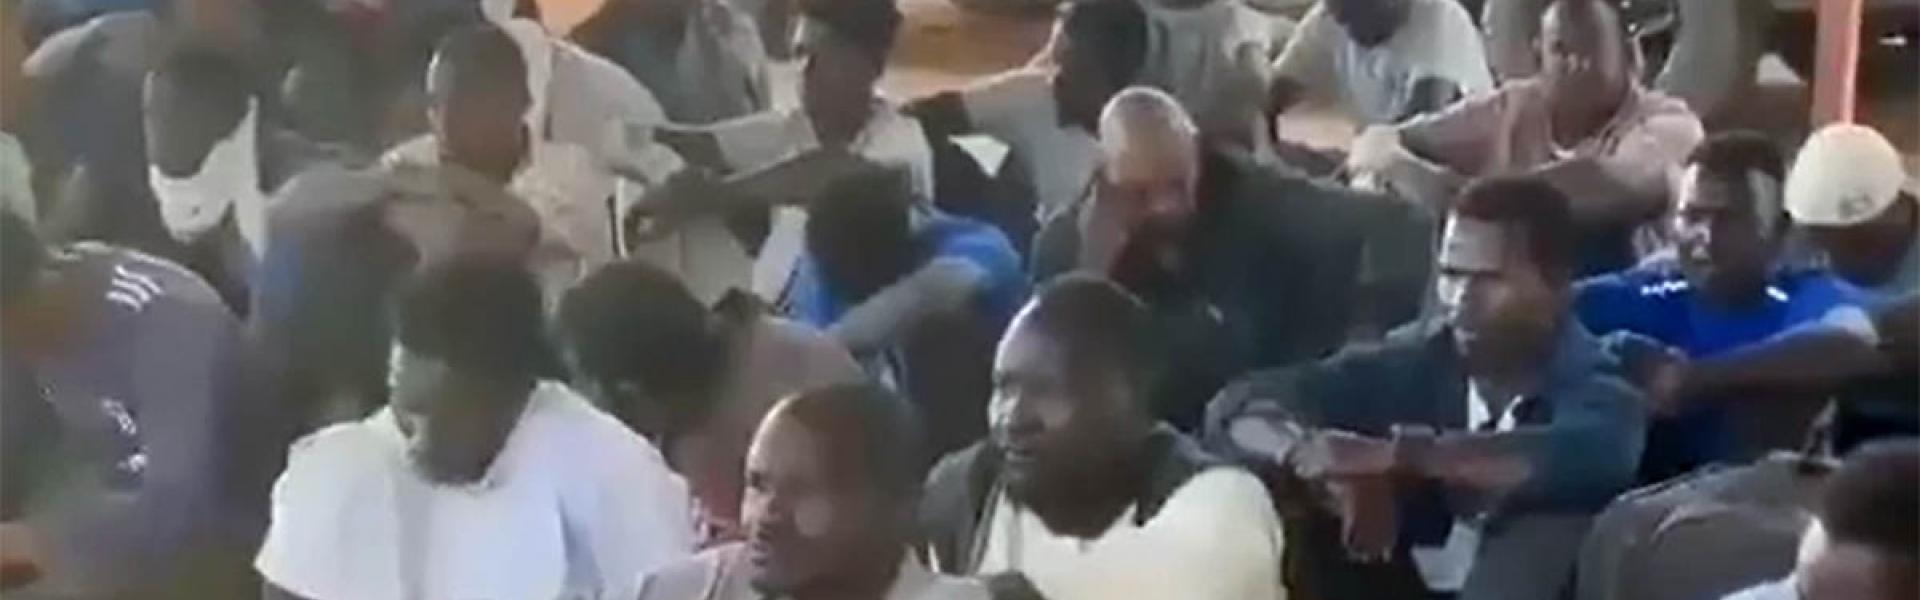 The migrants were held captive in a hideout in the downtown of Kufra 